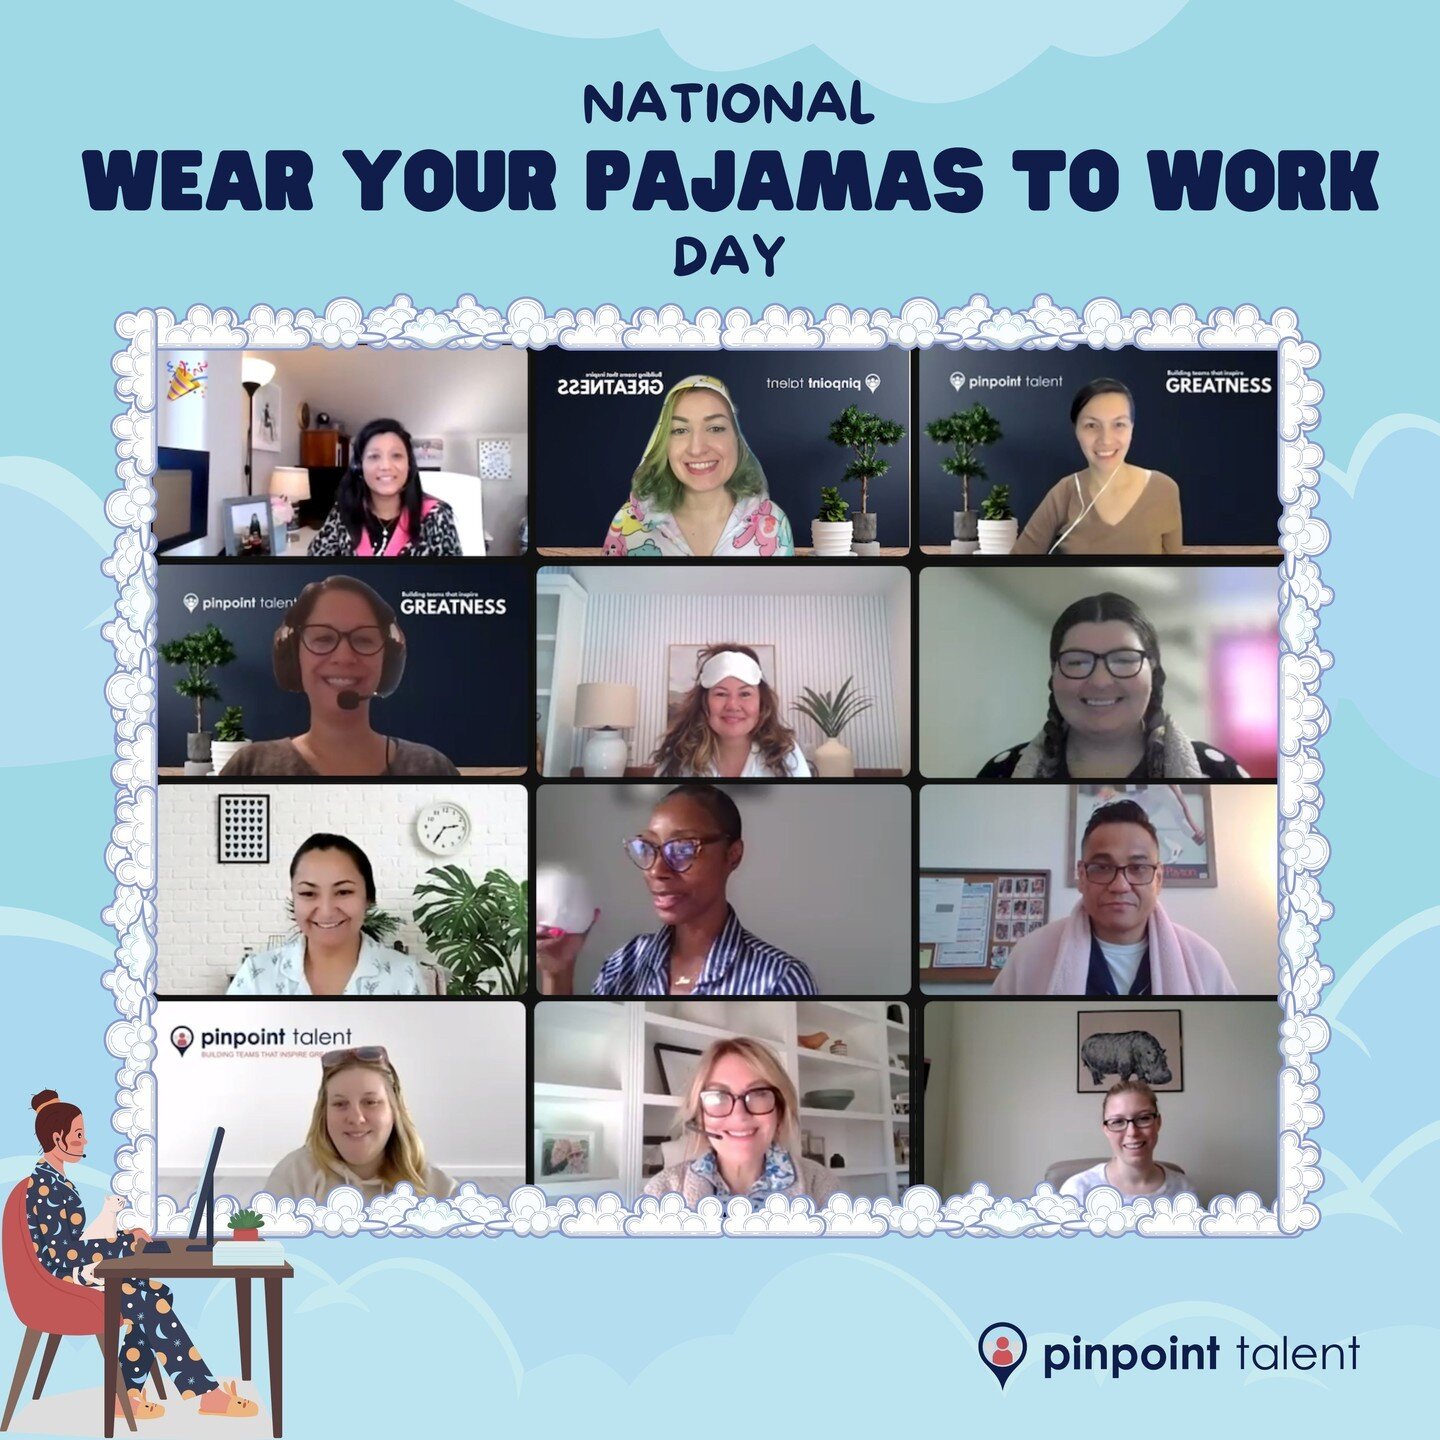 This year, National &quot;Wear Your Pajamas to Work&quot; Day fell on a Sunday (4/16), but that didn't stop us from celebrating! We believe that the joy and camaraderie that this day brings is too valuable to pass up, even if we're a bit late to the 